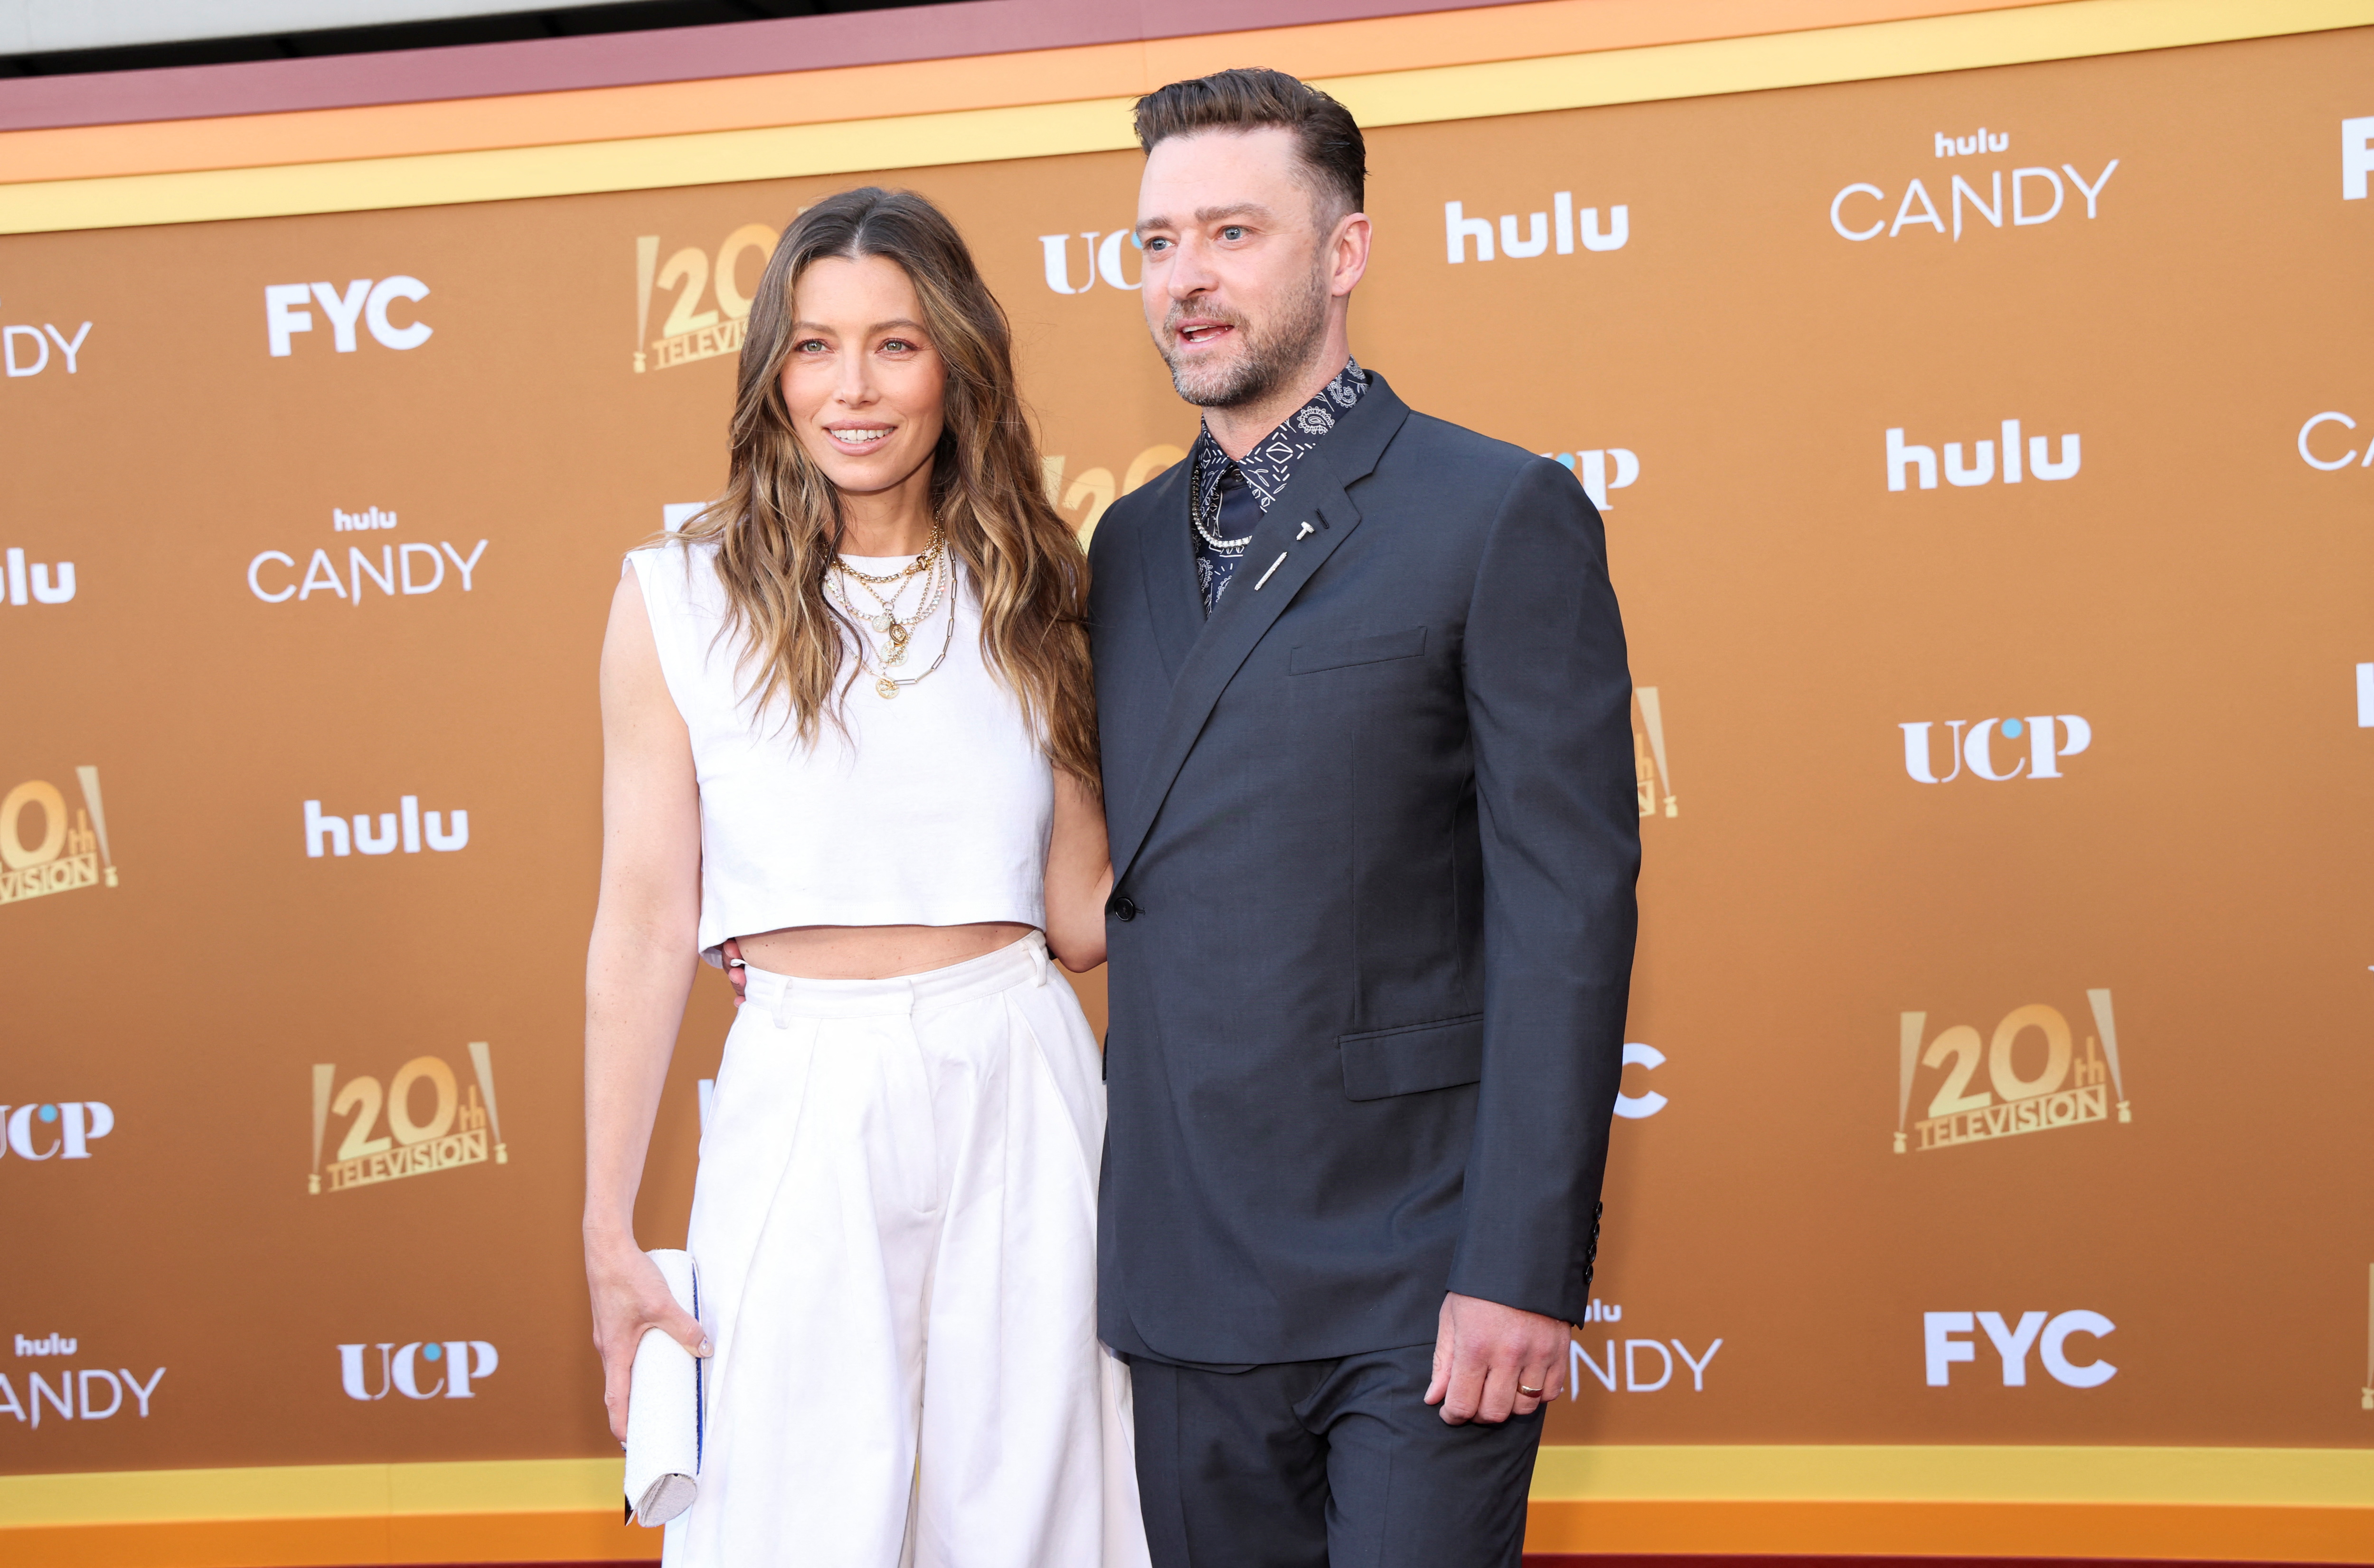 Justin Timberlake, husband of Jessica Biel in real life, appears in the series.  (REUTERS/Mario Anzuoni)